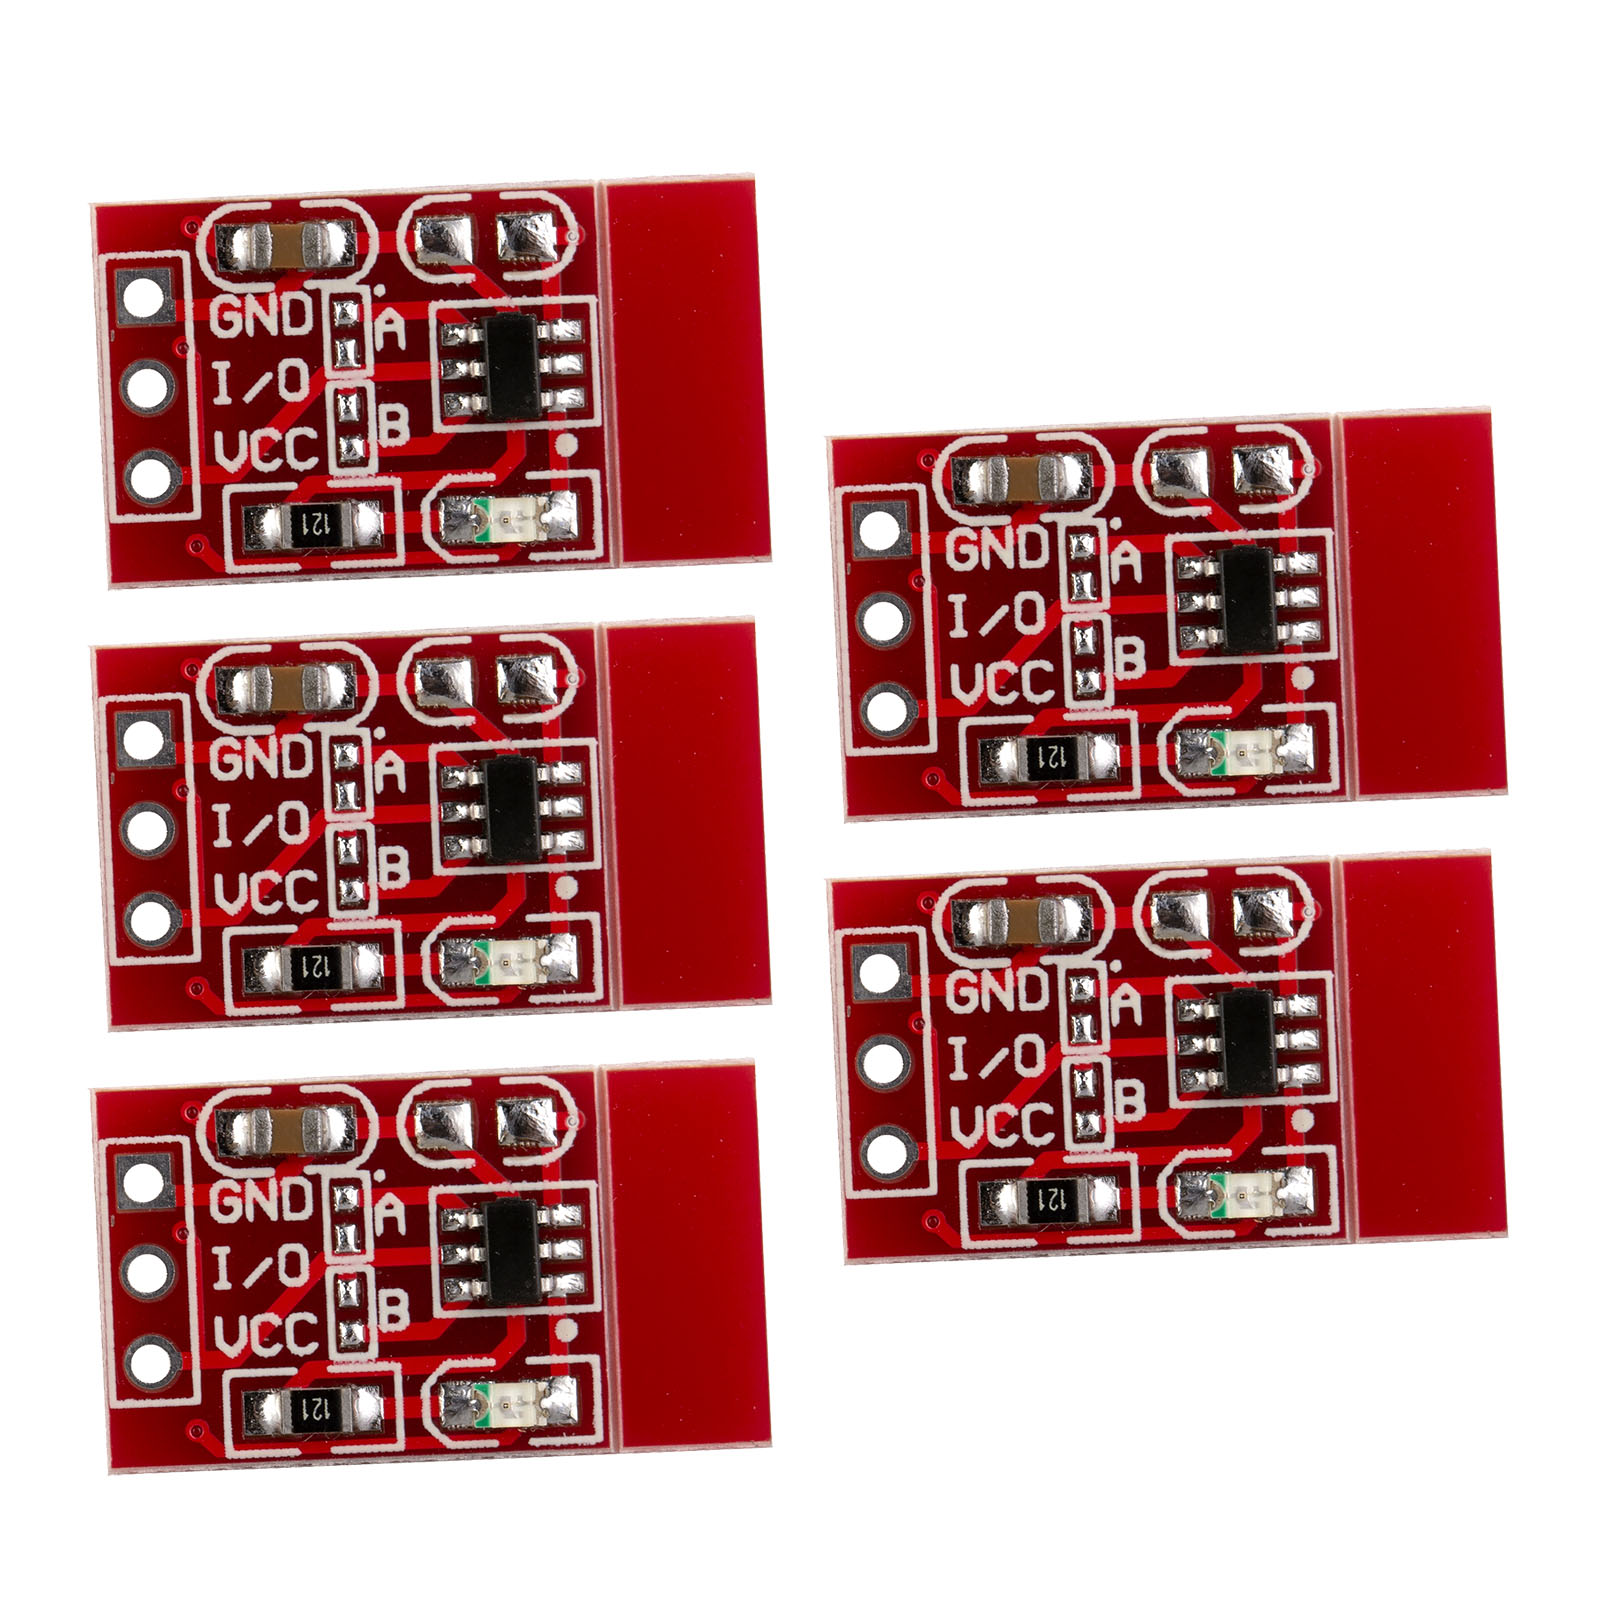 5pcs TTP223 Capacitive Touch Switch Button Self-Lock Module for Arduino